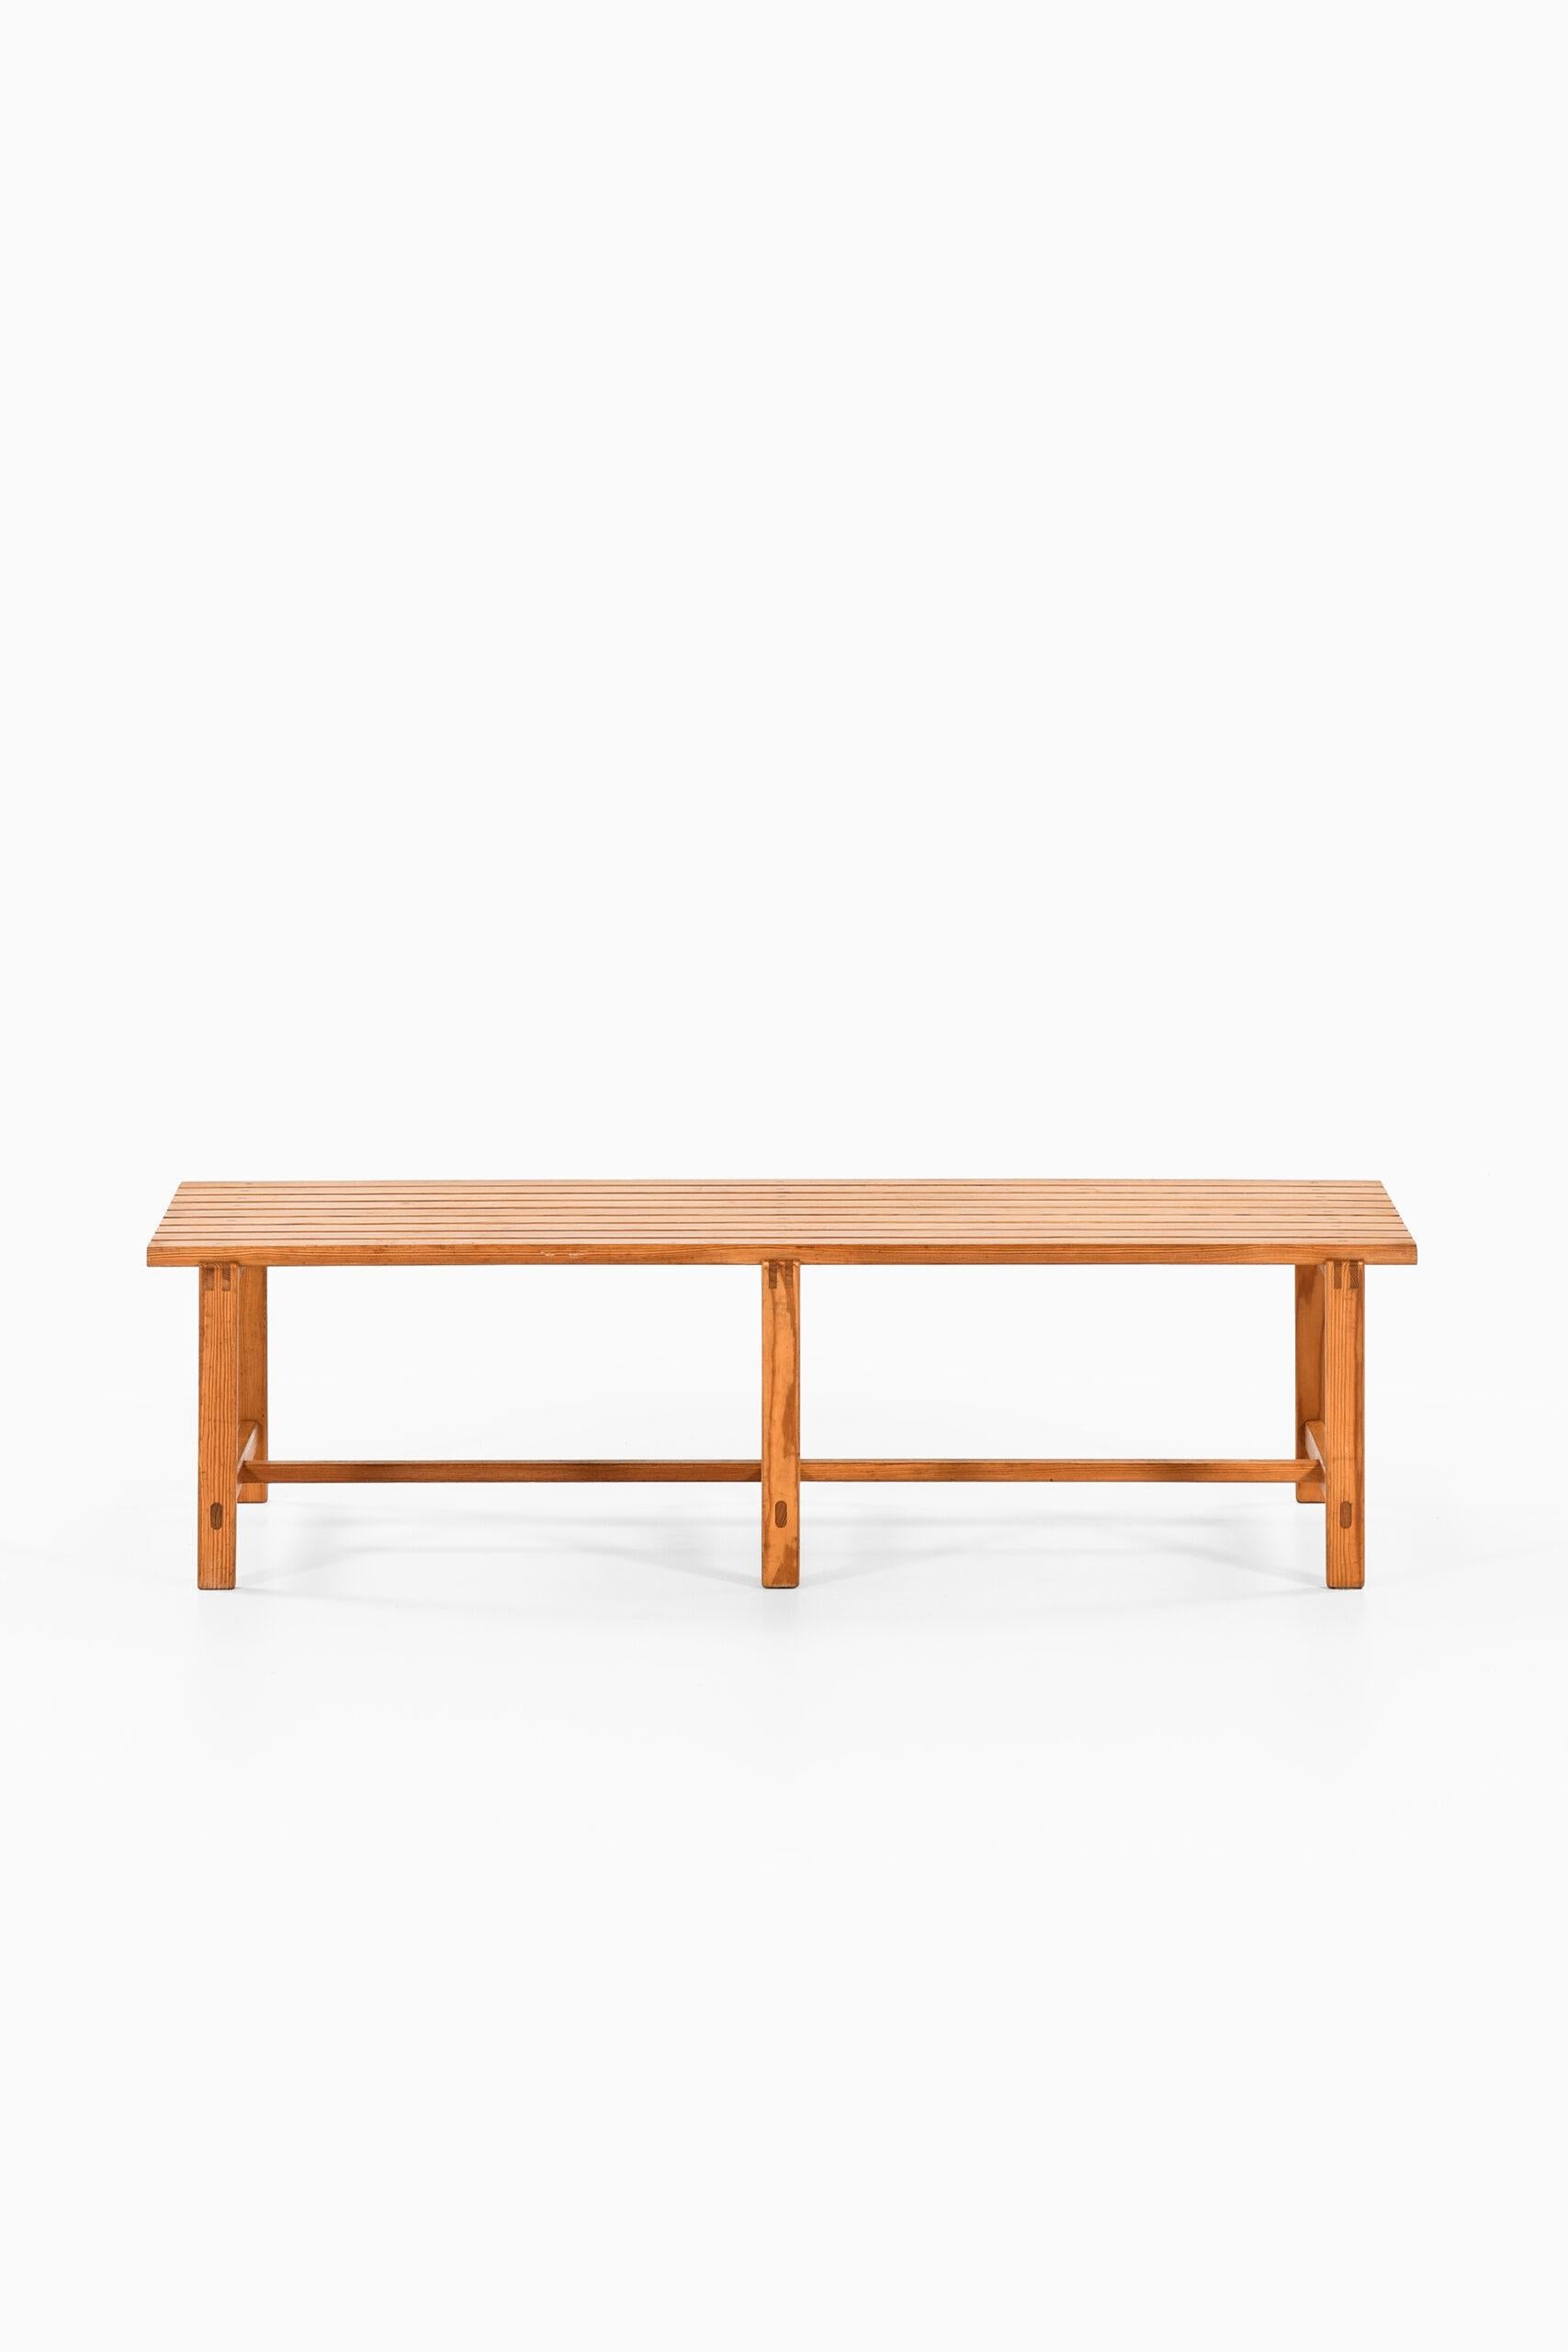 Rare bench / side table by unknown designer. Produced in Sweden.